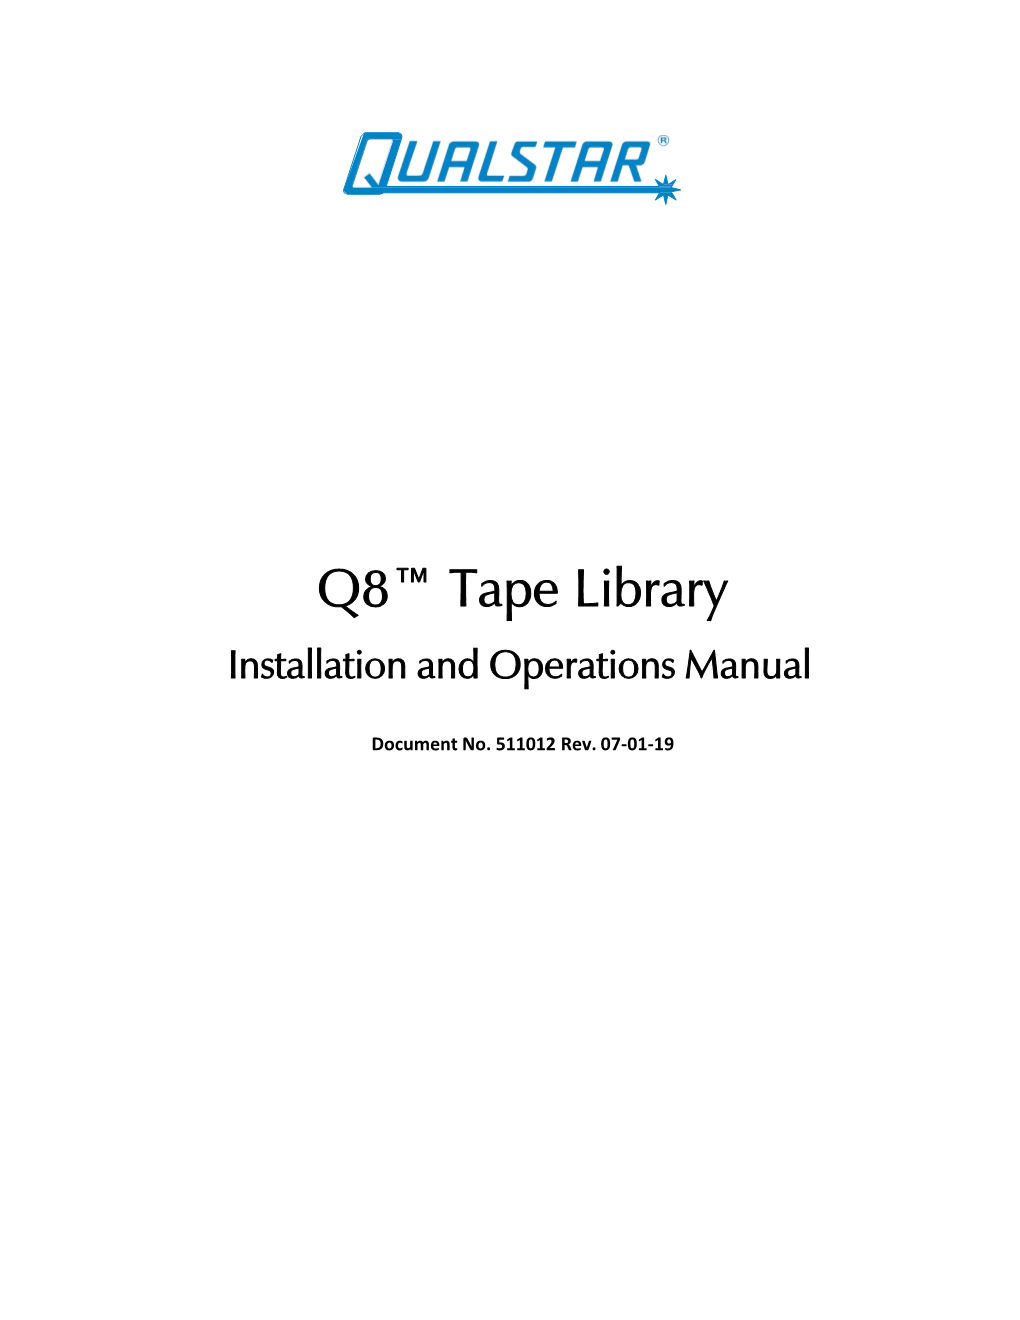 Q8™ Tape Library Installation and Operations Manual